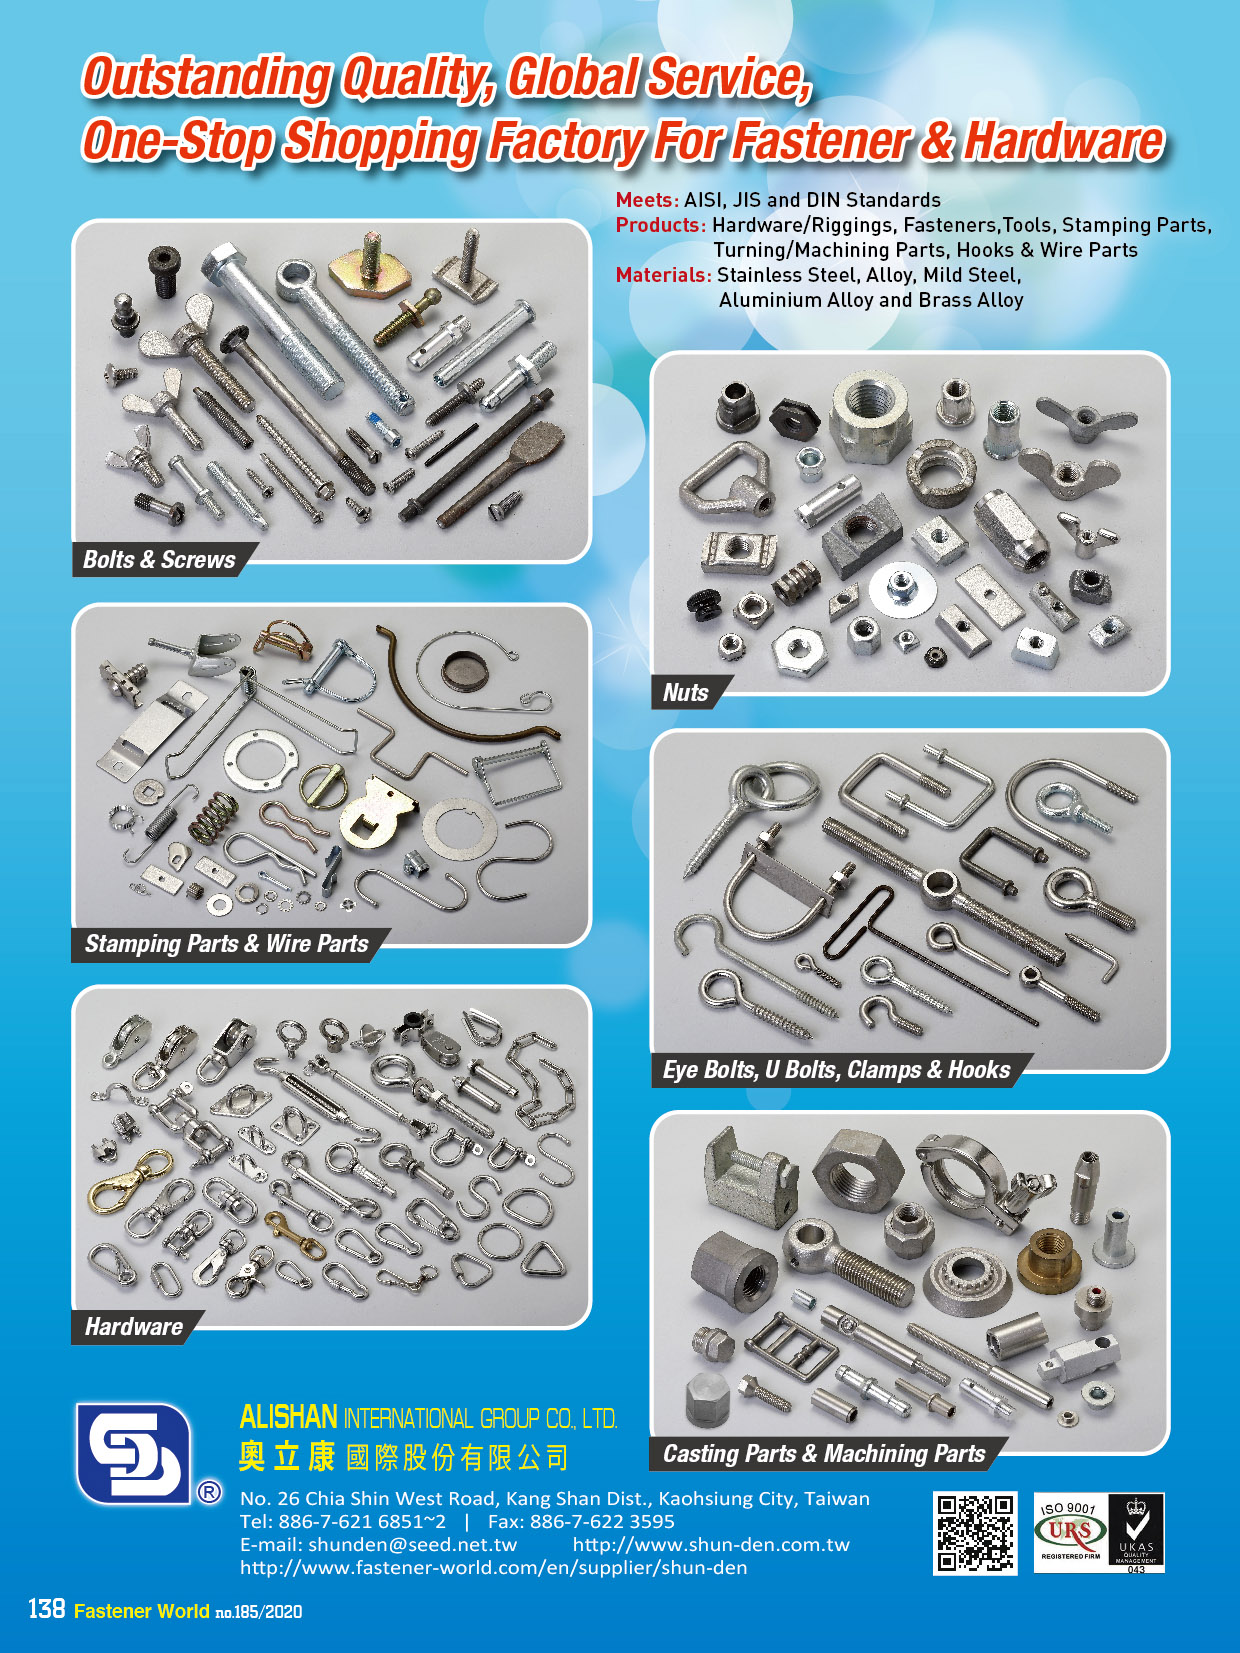 SHUN DEN IRON WORKS CO., LTD.  , Bolts, Screws, Stamping Parts, Wire Parts, Hardware, Nuts, Eye Bolts, U Bolts, Clamps & Hooks, Casting Parts, Machining Parts , Casting Machine Bases